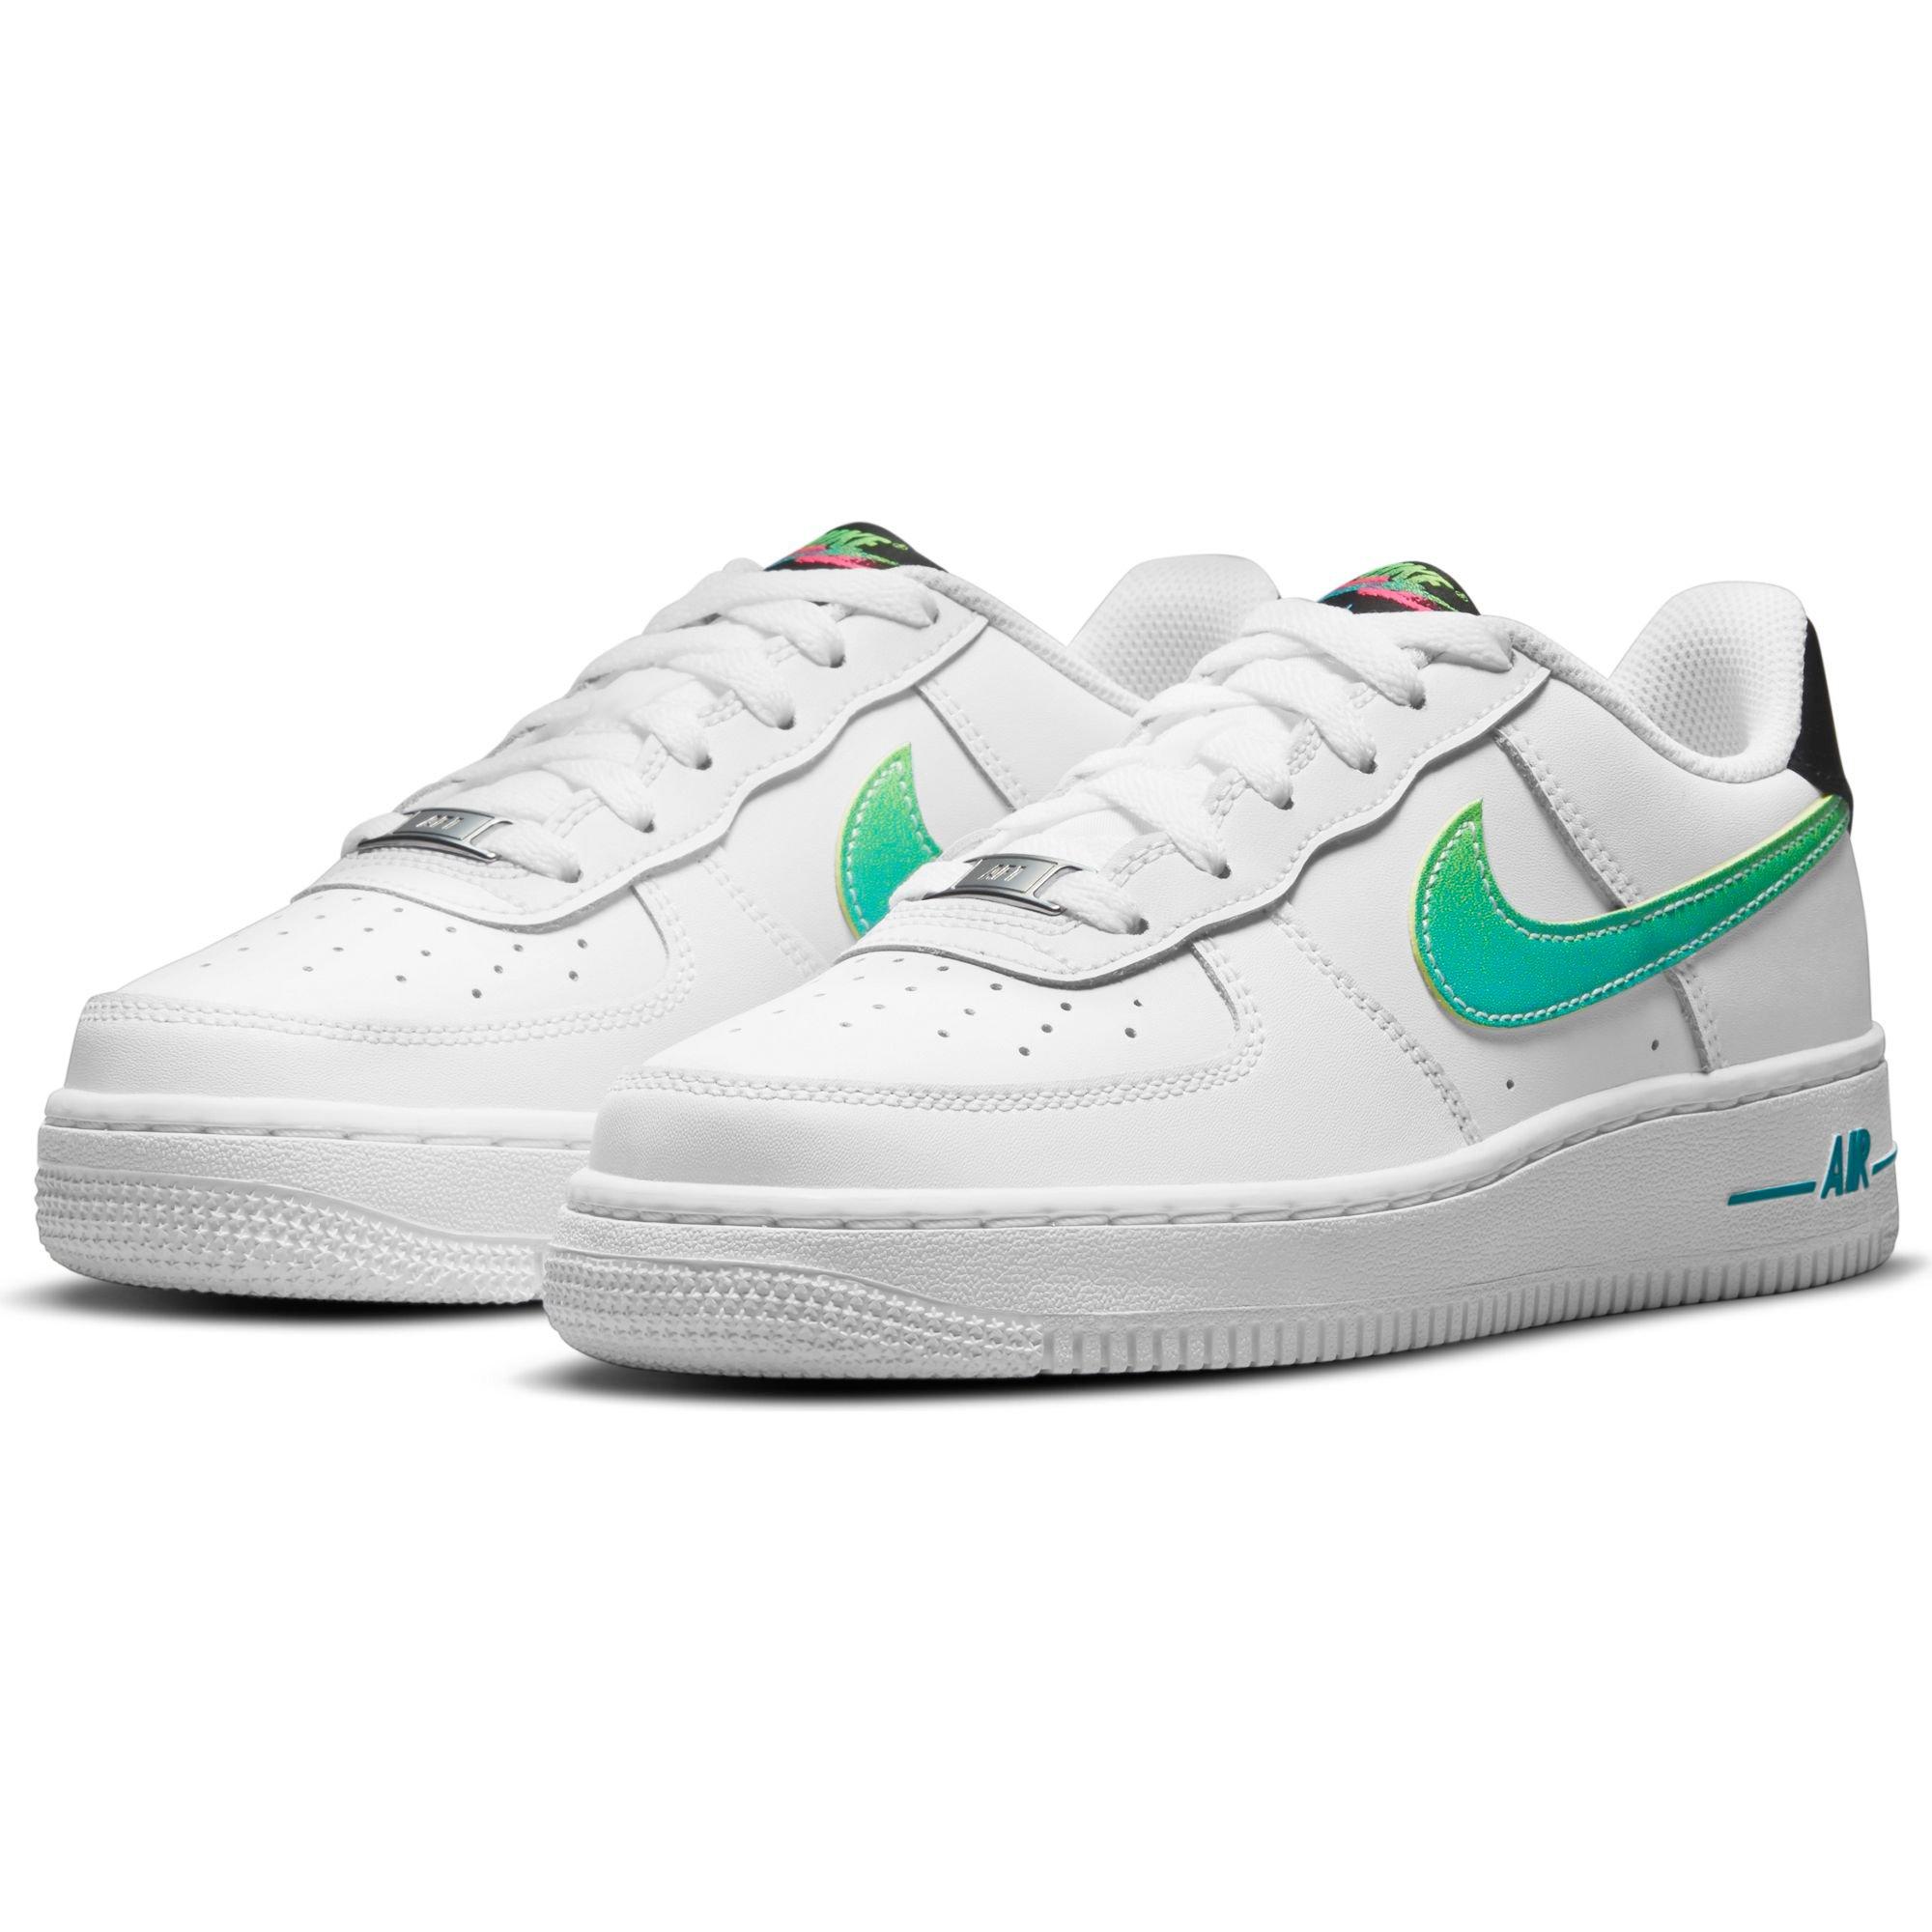 Keep it retro for #BacktoSchool! Gear up with the #Nike Air Force One LV8  FTL part of the 'Legacy' pack available in GS sizing online &…